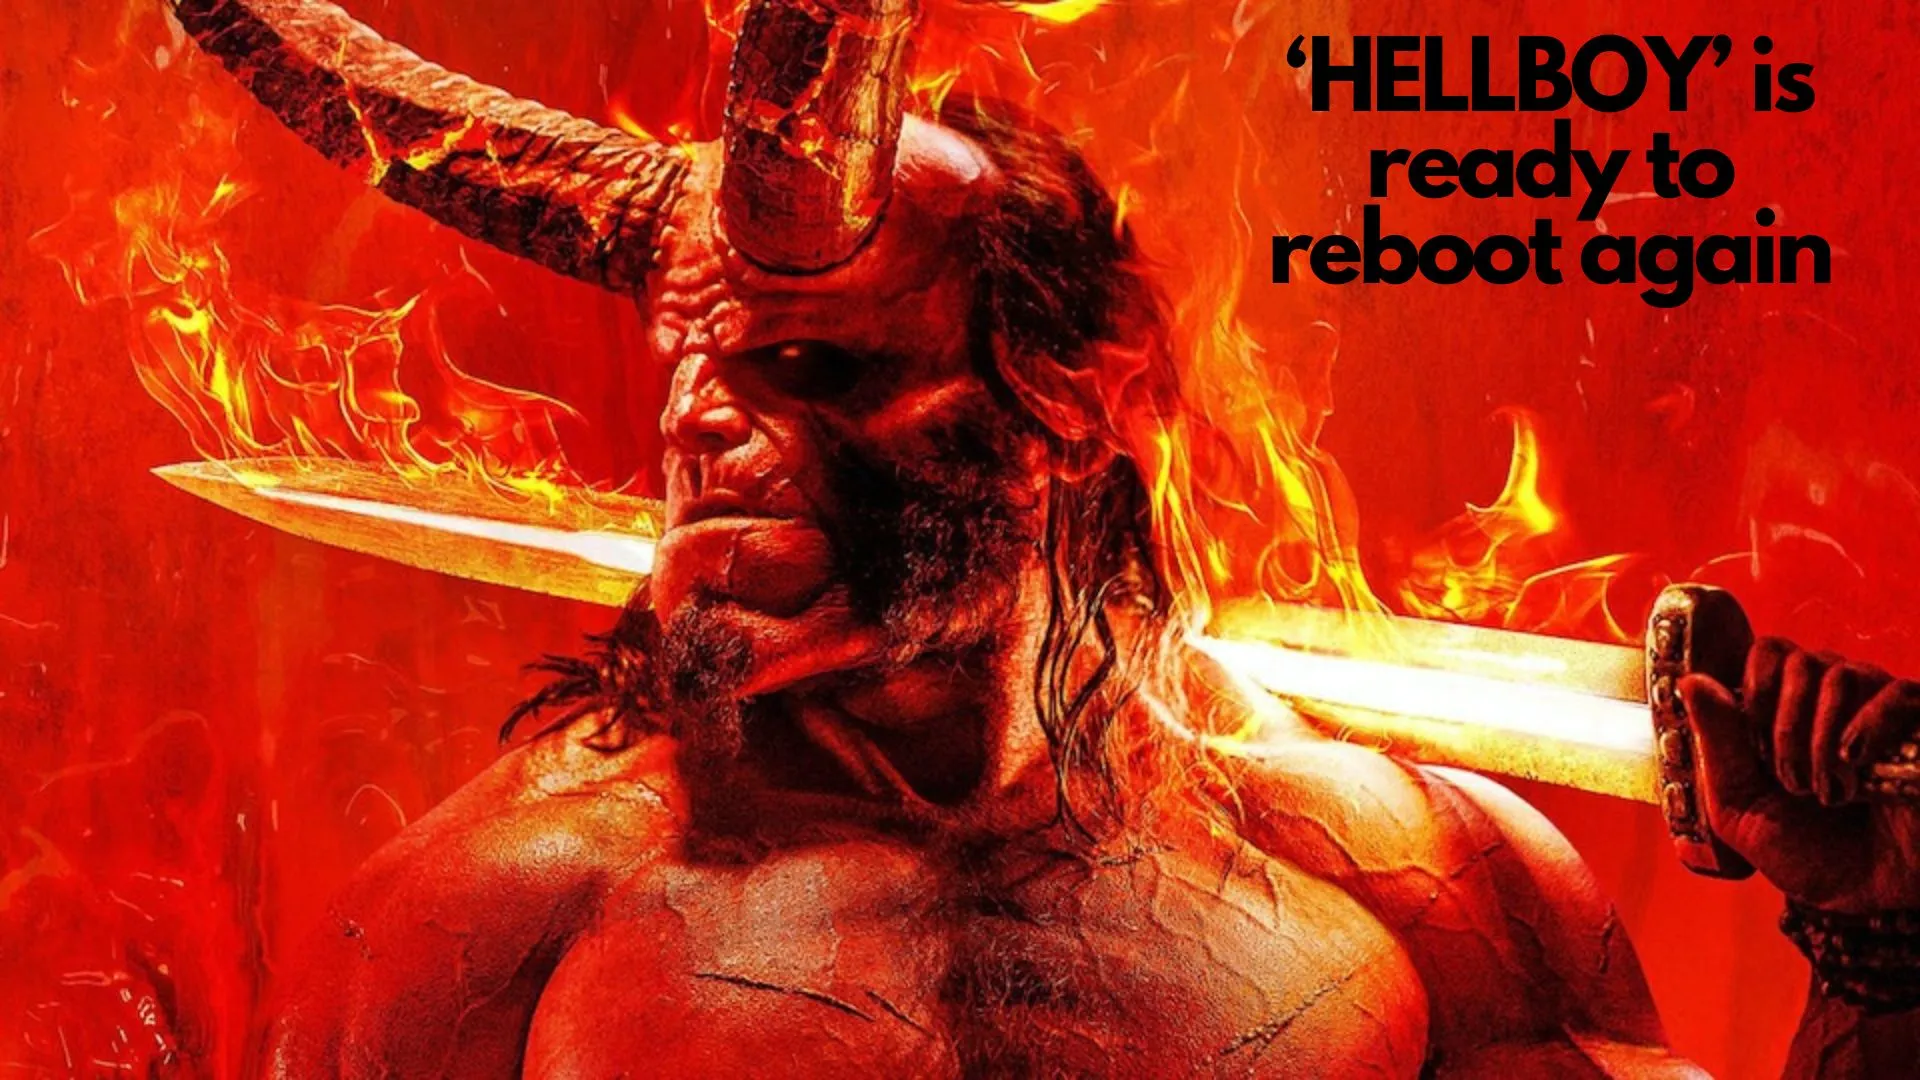 ‘HELLBOY’  is ready to reboot again (Image credit: empireonline)